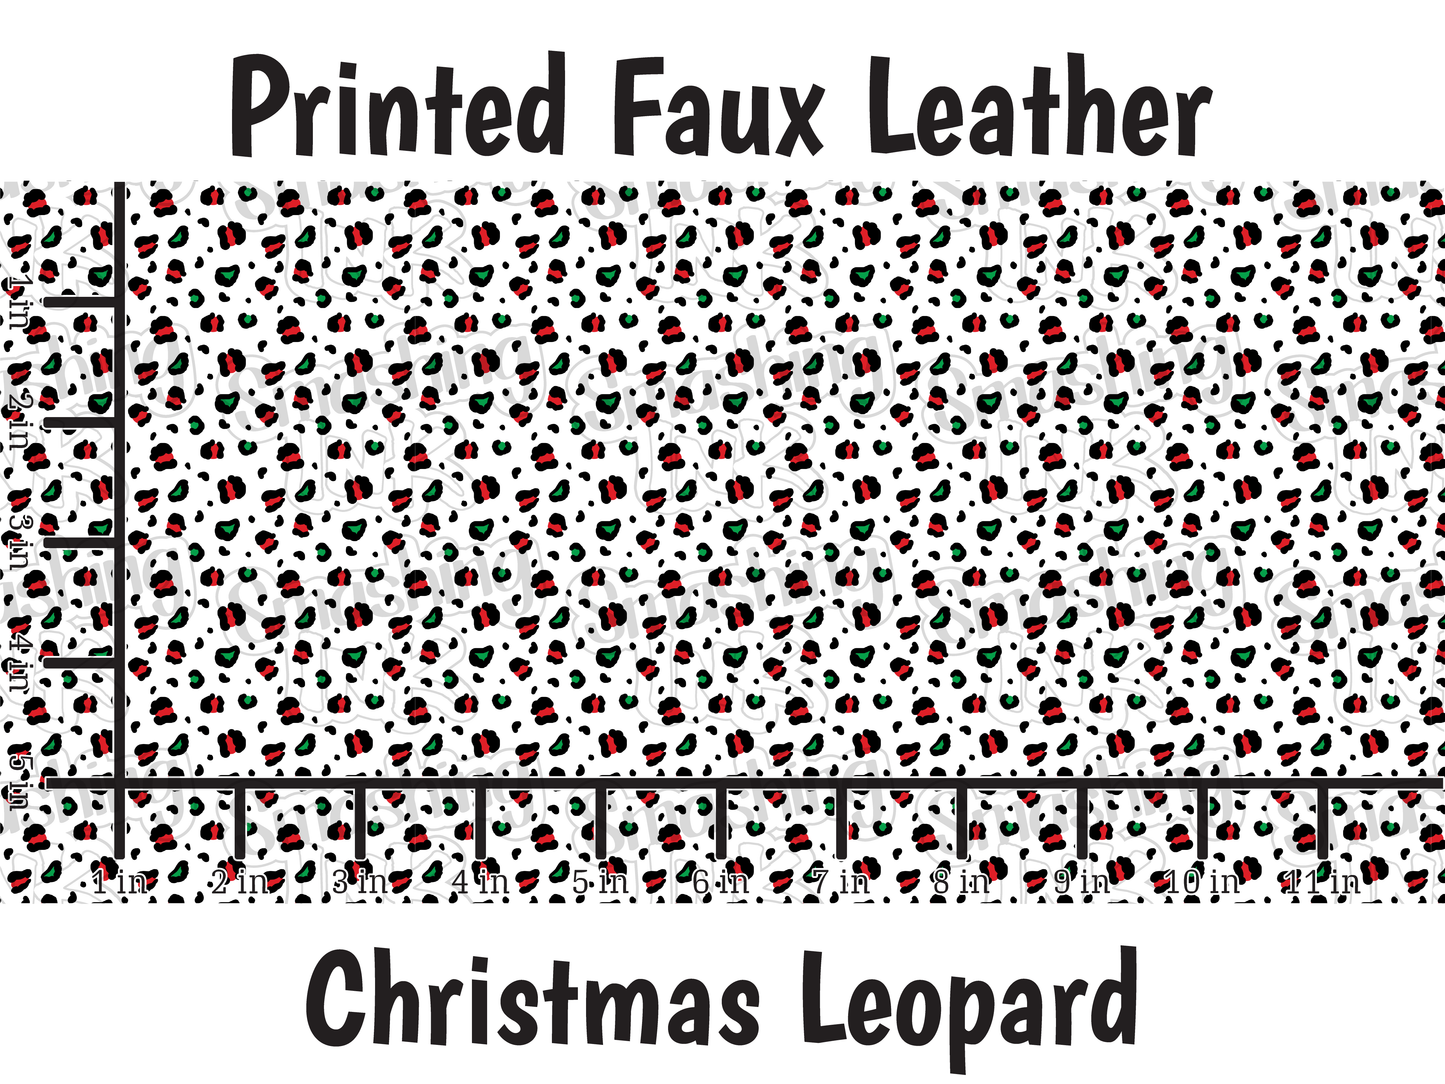 Christmas Leopard - Faux Leather Sheet (SHIPS IN 3 BUS DAYS)